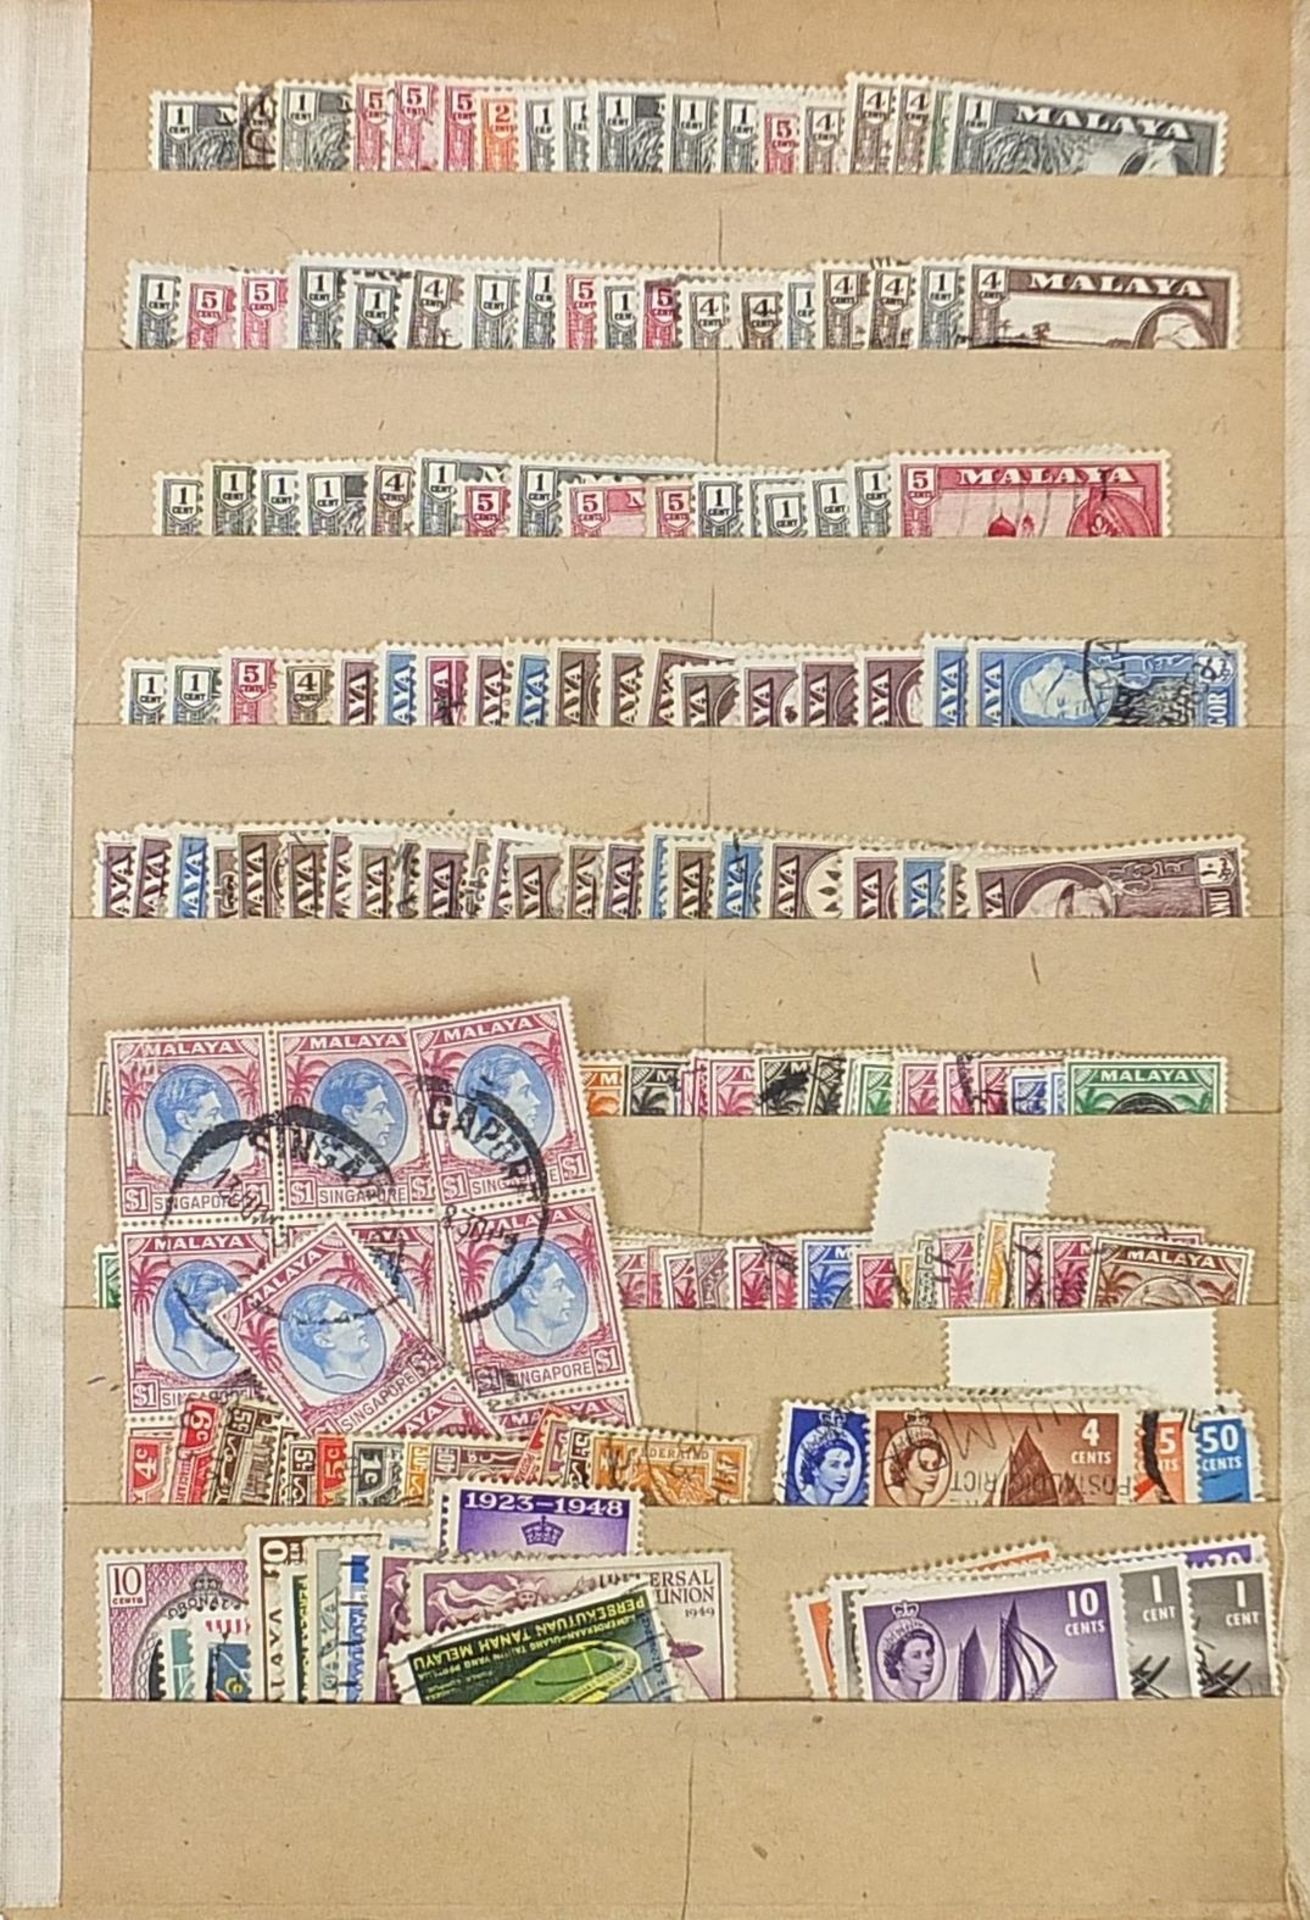 Collection of Commonwealth stamps arranged in an album including Hong Kong